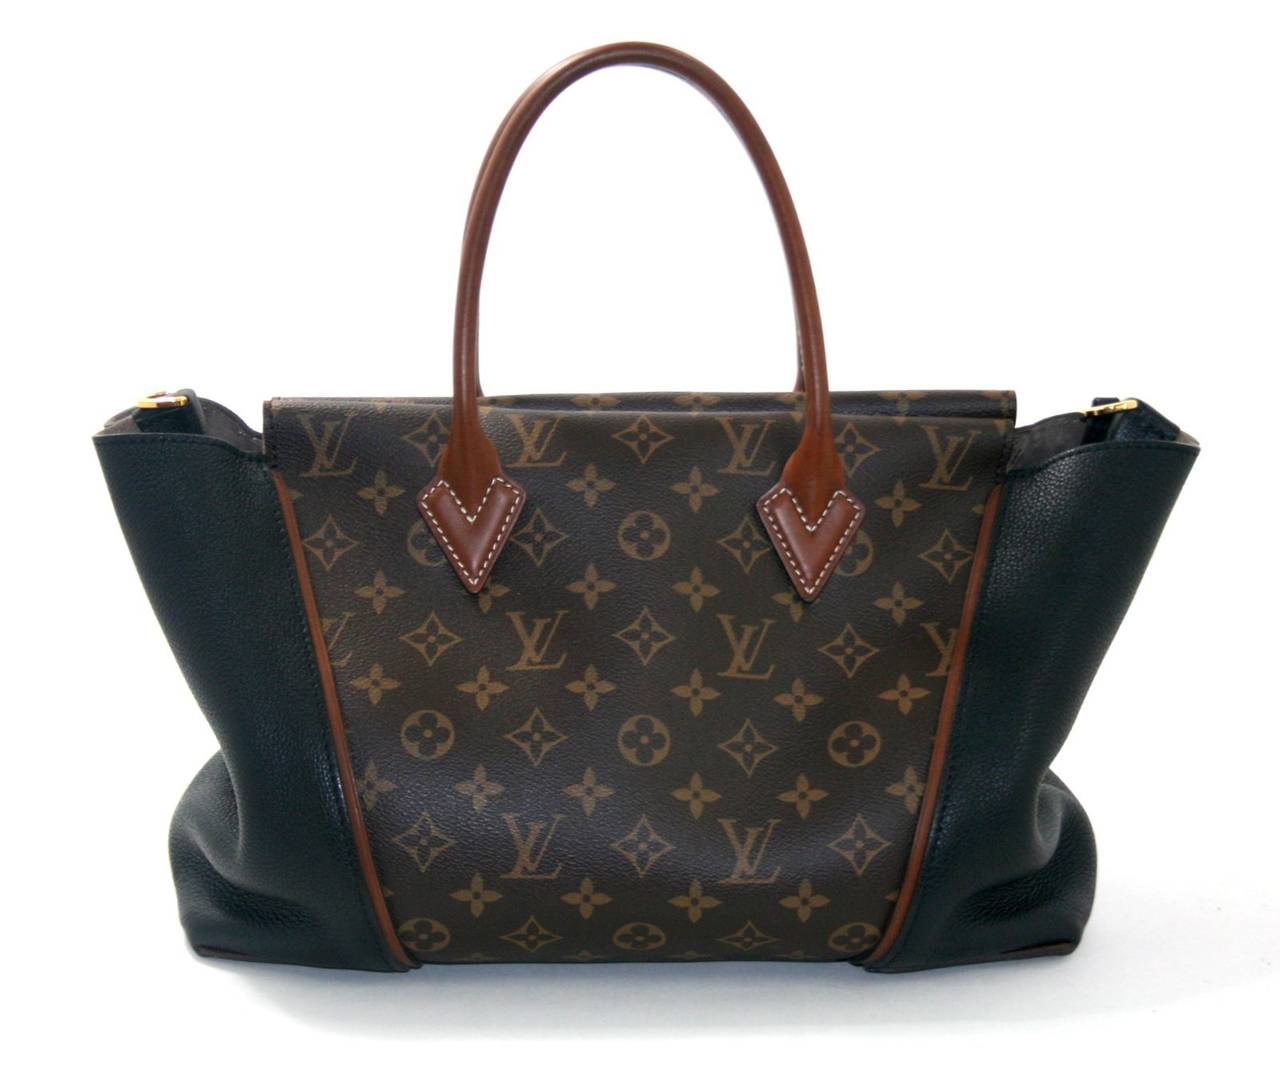 Louis Vuitton’s Noir Monogram W Tote in the PM size is a spectacular find in mint condition.  There is some very slight wear on the handles; please see photo.  The sophisticated style carries everything with ease for chic daily use in any